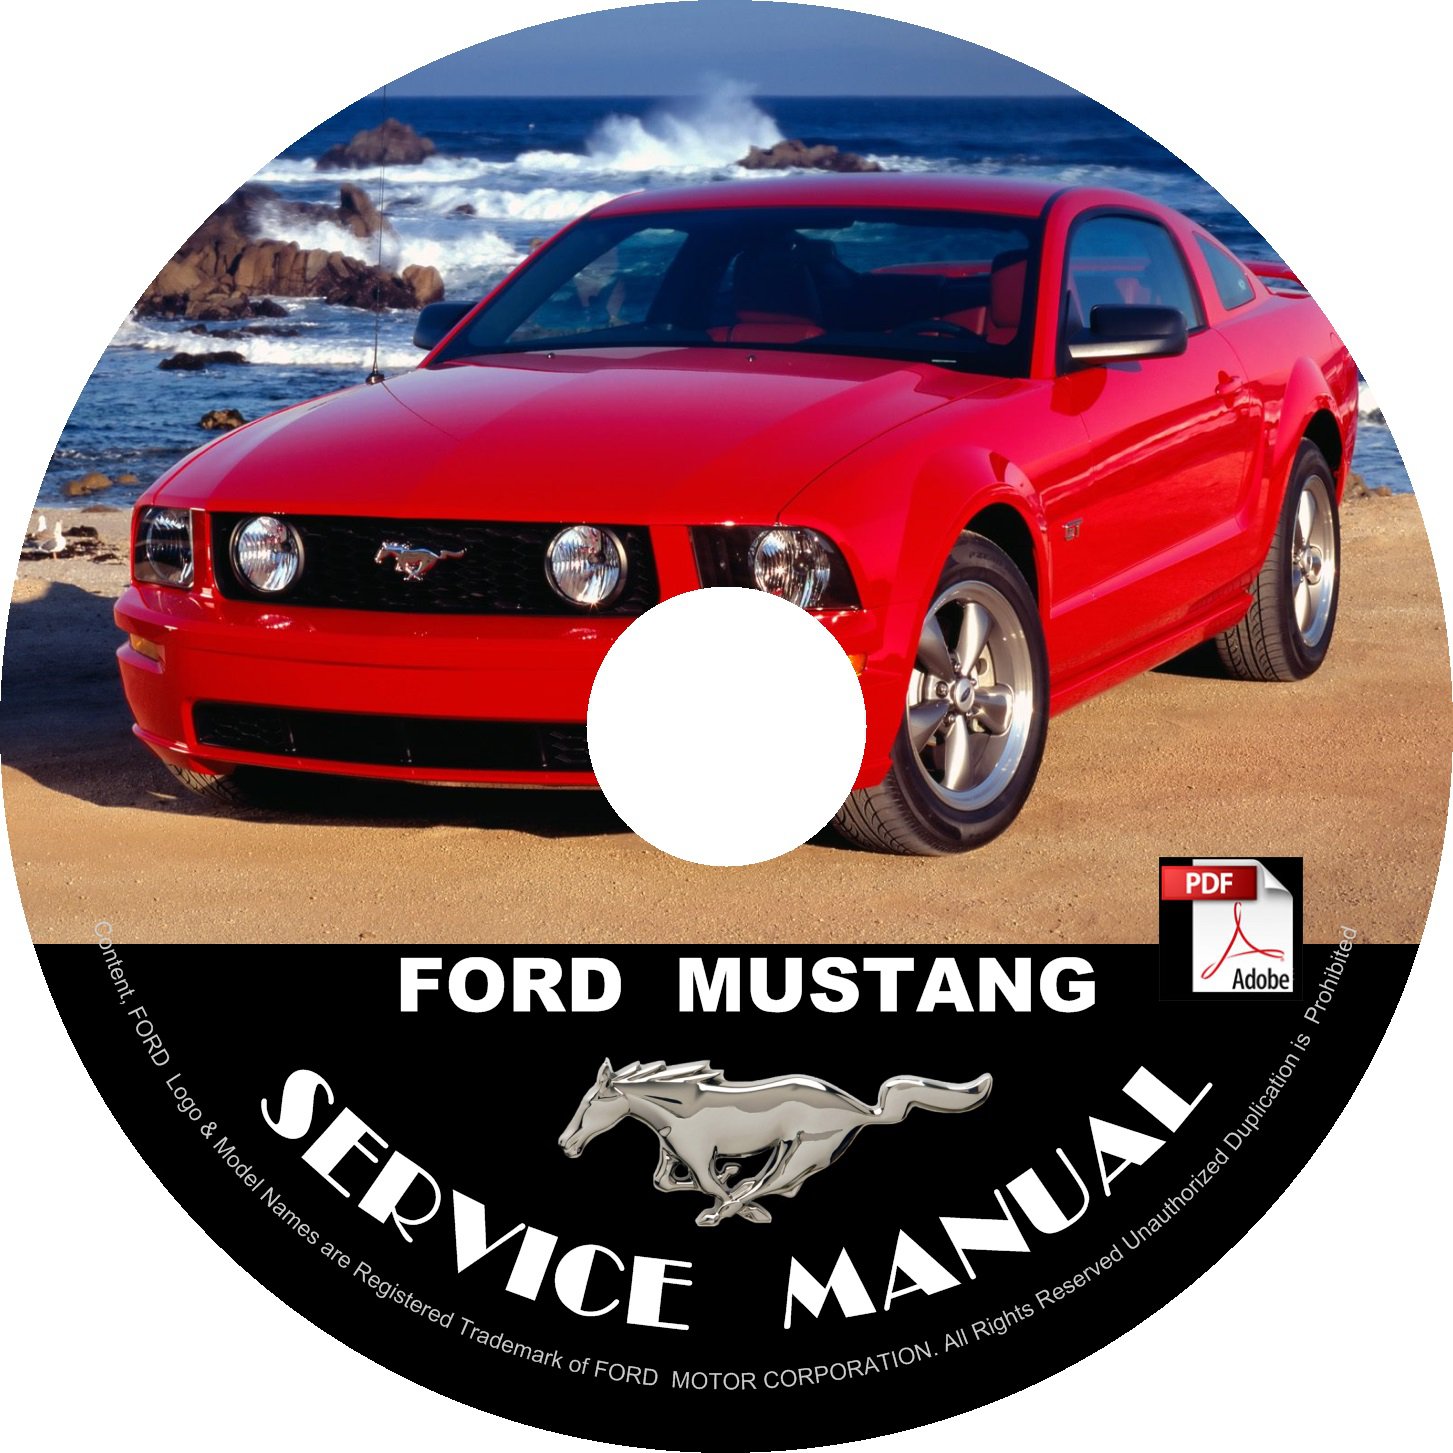 2007 ford mustang service manual